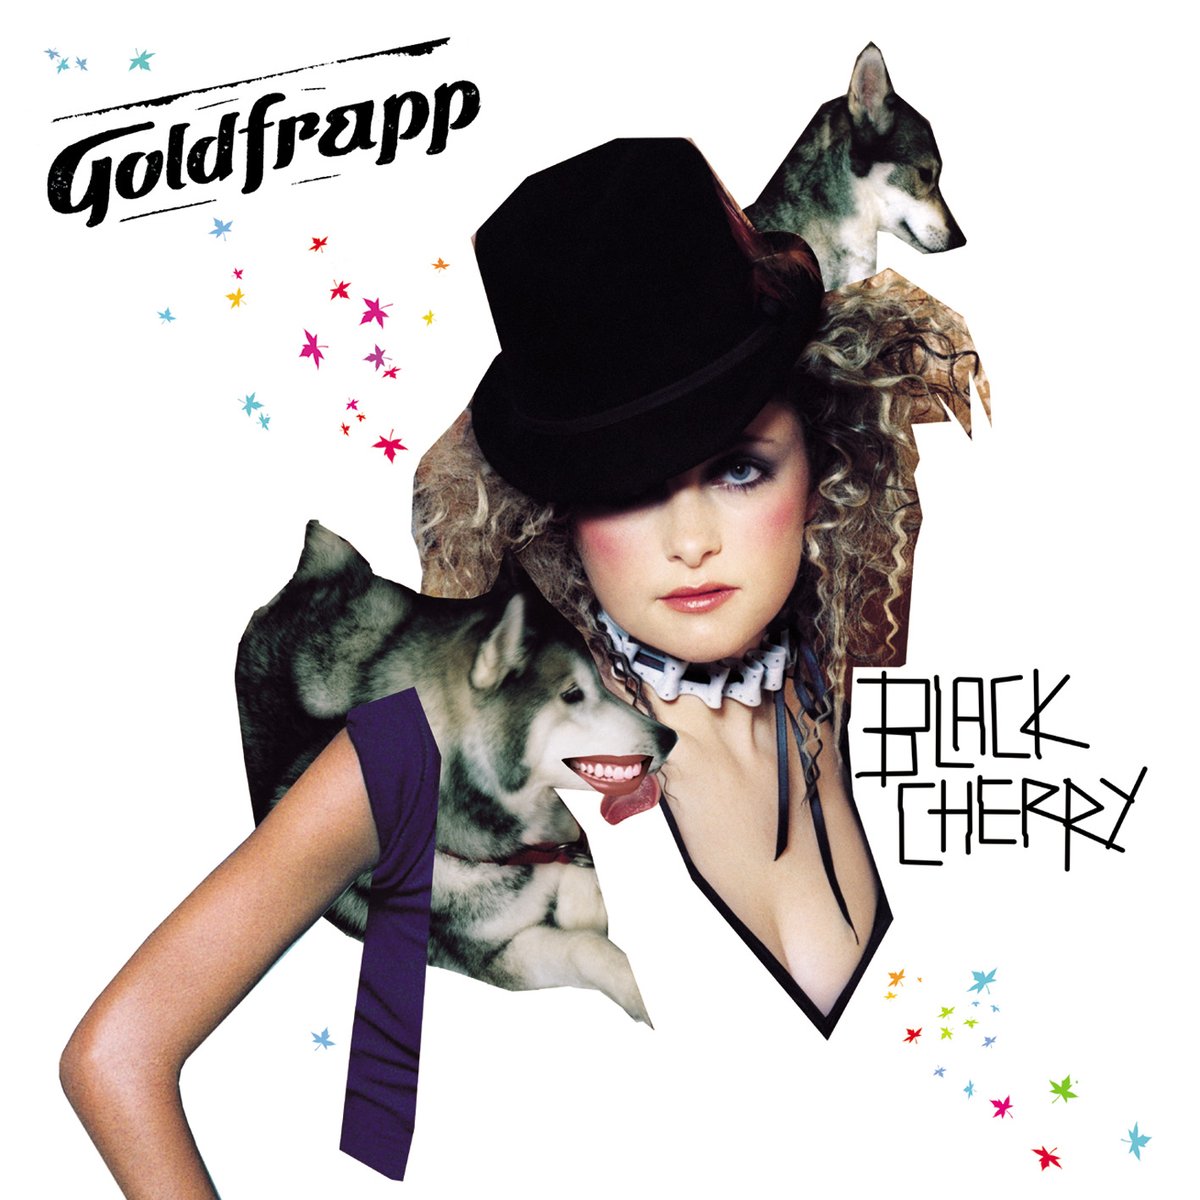 Today we celebrate 21 years of Goldfrapp's iconic album 'Black Cherry'. What's your favorite song on the album? @goldfrapp